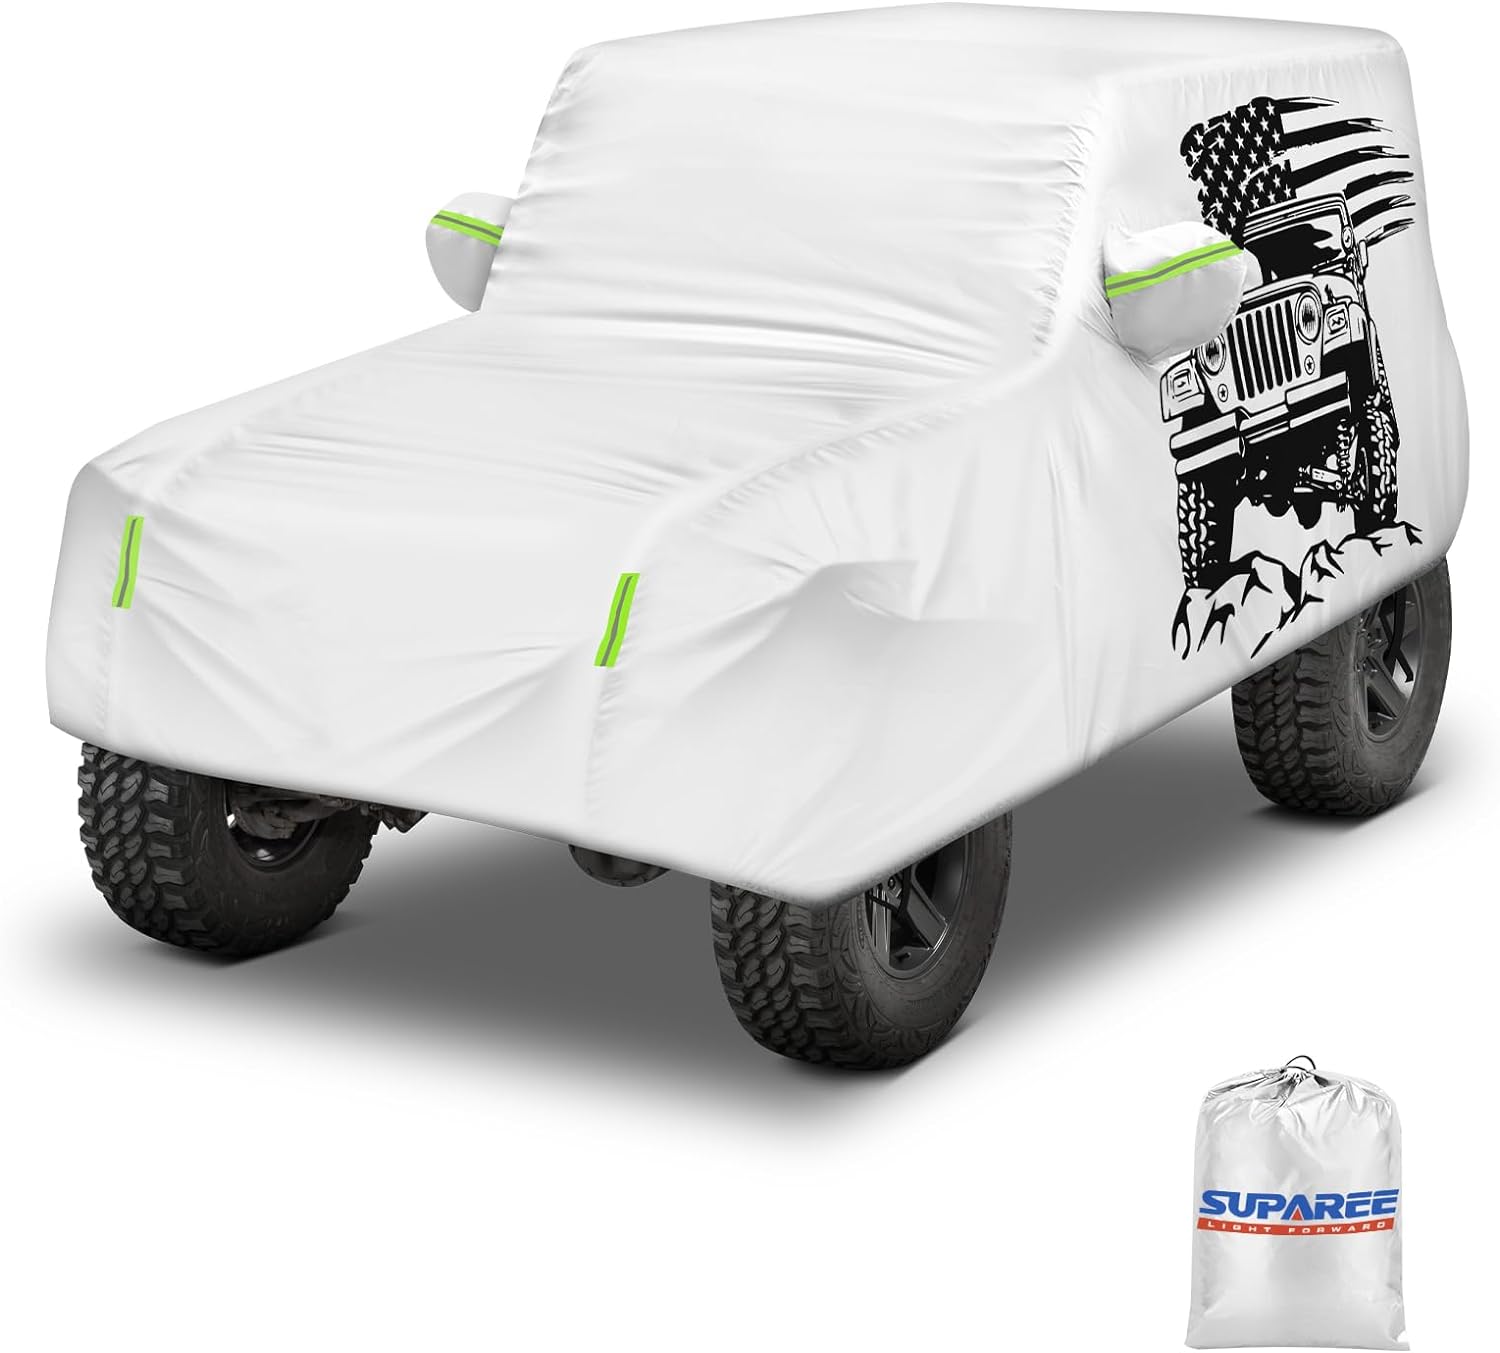 SUPAREE Jeep Cover Suparee New Jeep Full Cover Waterproof for 1976-2006 Wrangler TJ YJ 2 Door Product description